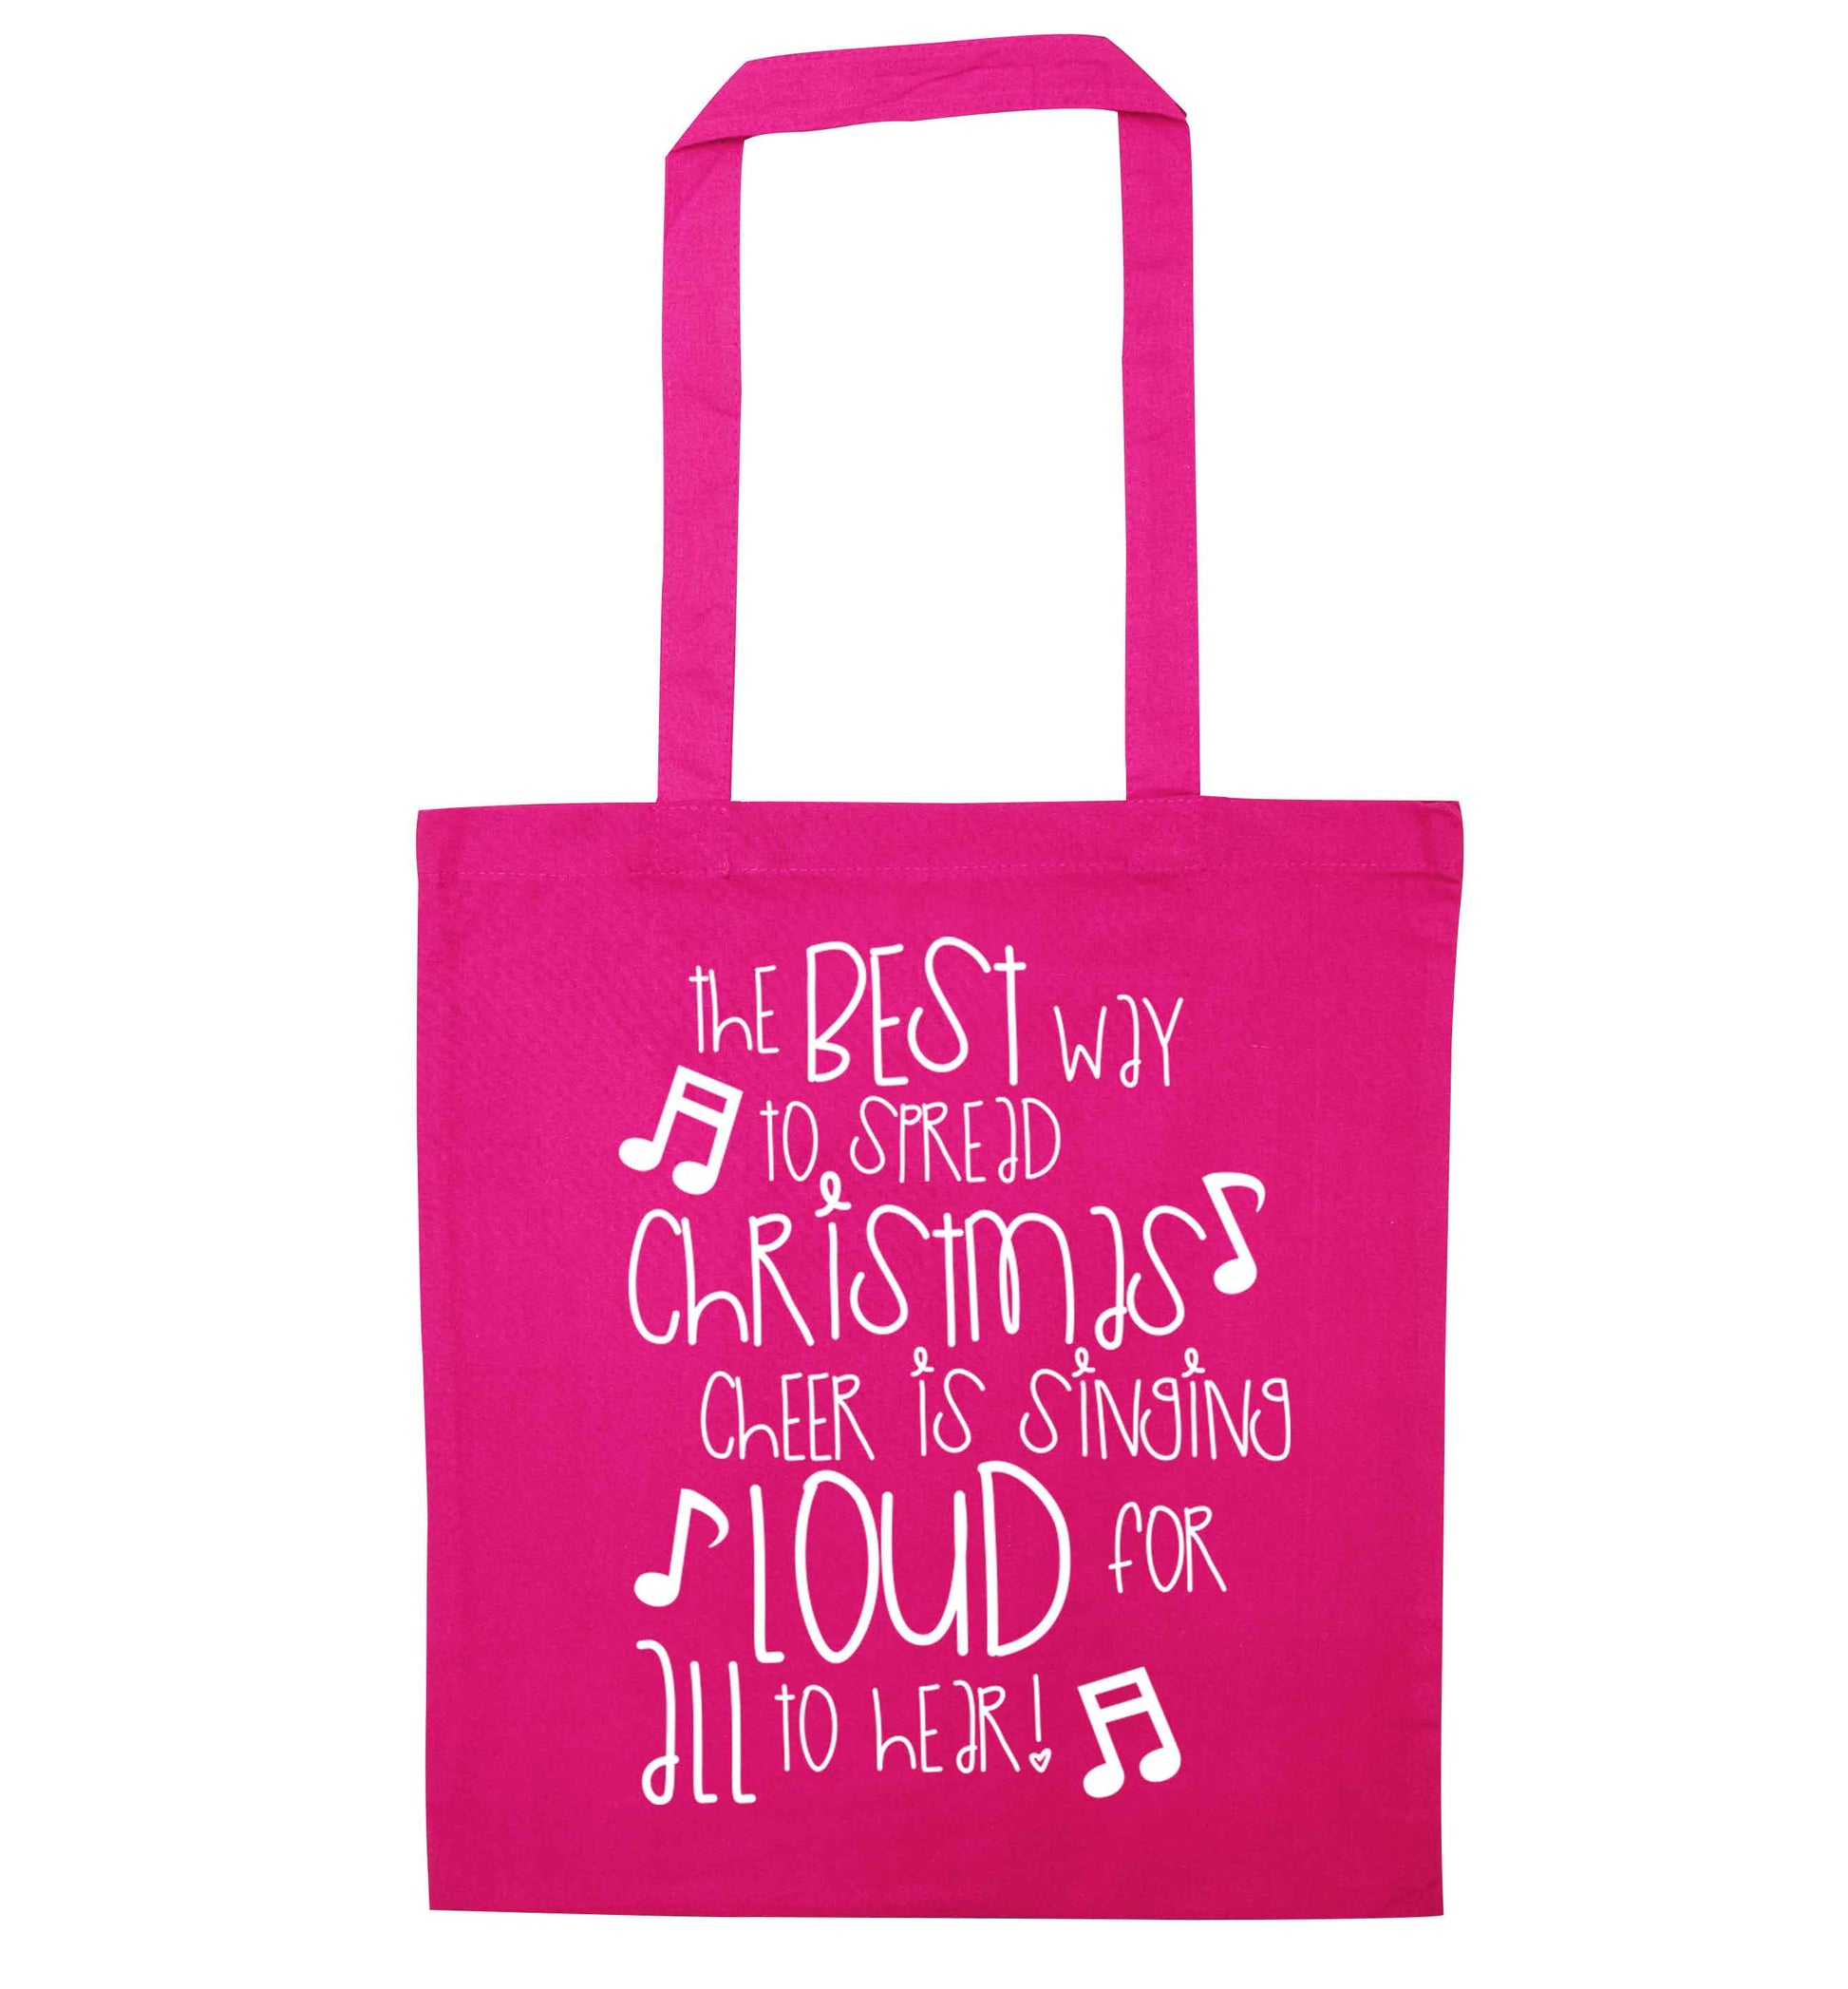 The best way to spread Christmas cheer is singing loud for all to hear pink tote bag